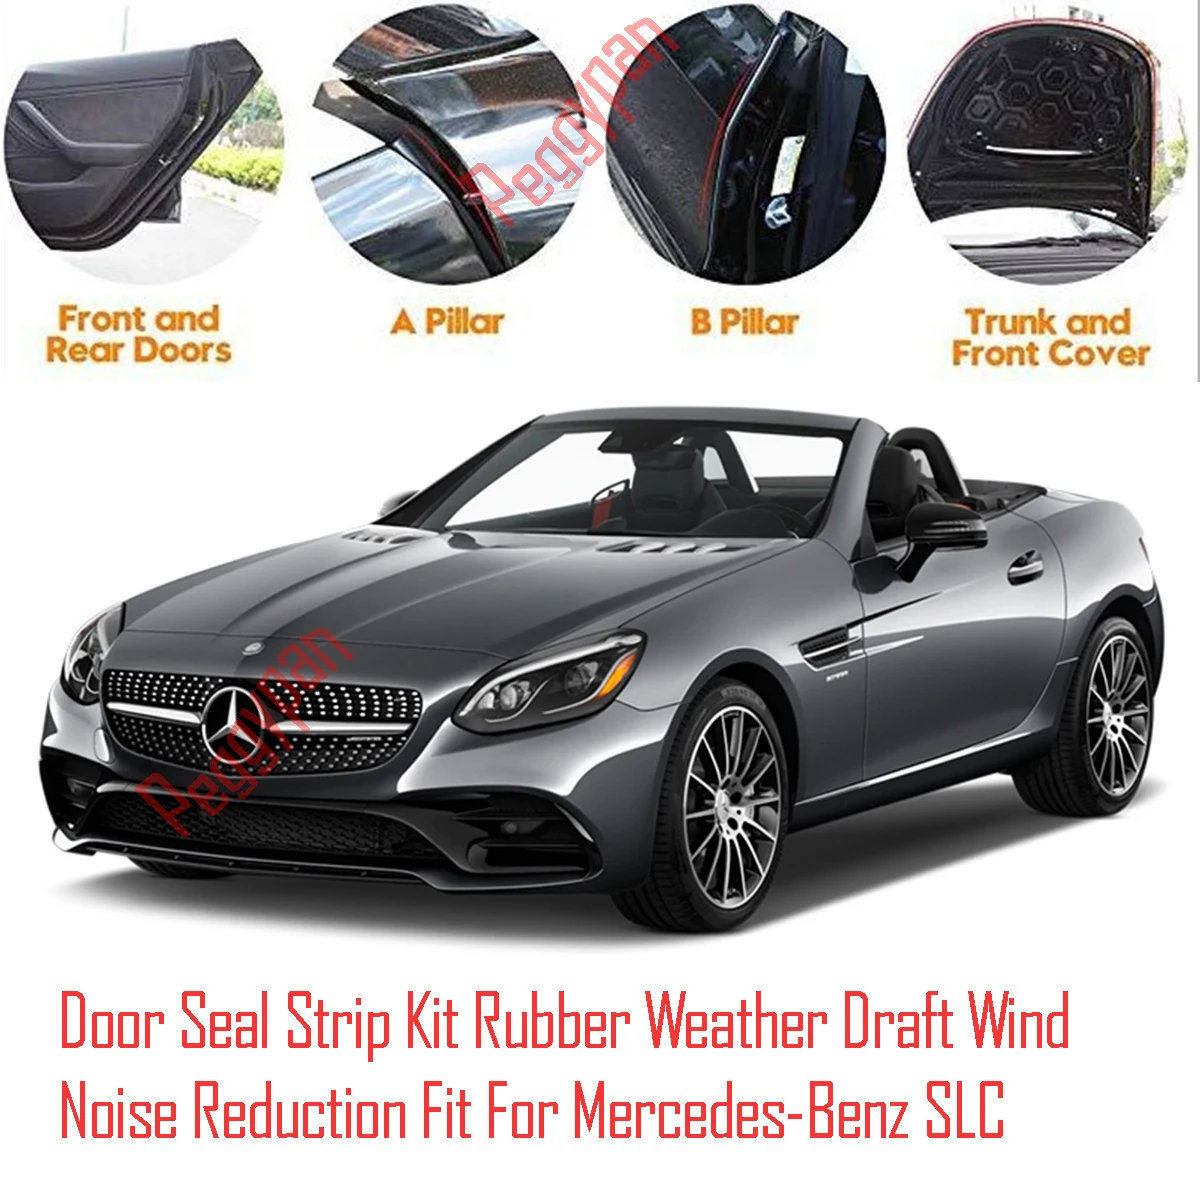 Door Seal Strip Kit Self Adhesive Window Engine Cover Soundproof Rubber Weather Draft Wind Noise Reduction For Mercedes Benz SLC